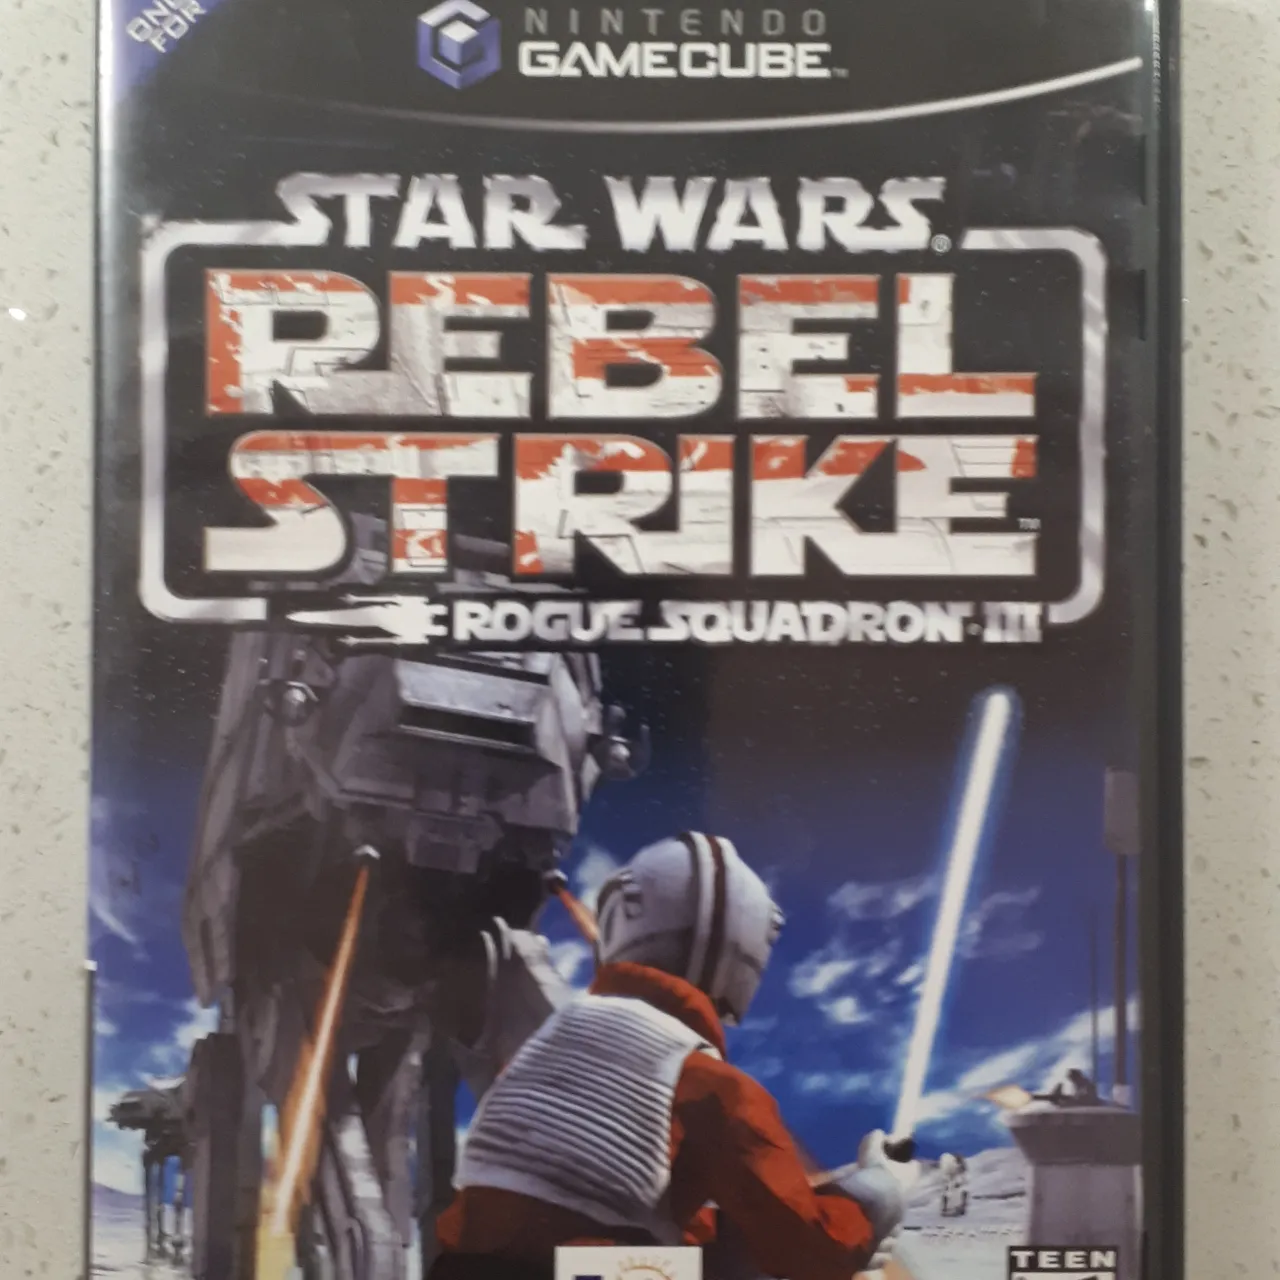 Star Wars Rogue Squadron 3 for Gamecube photo 1